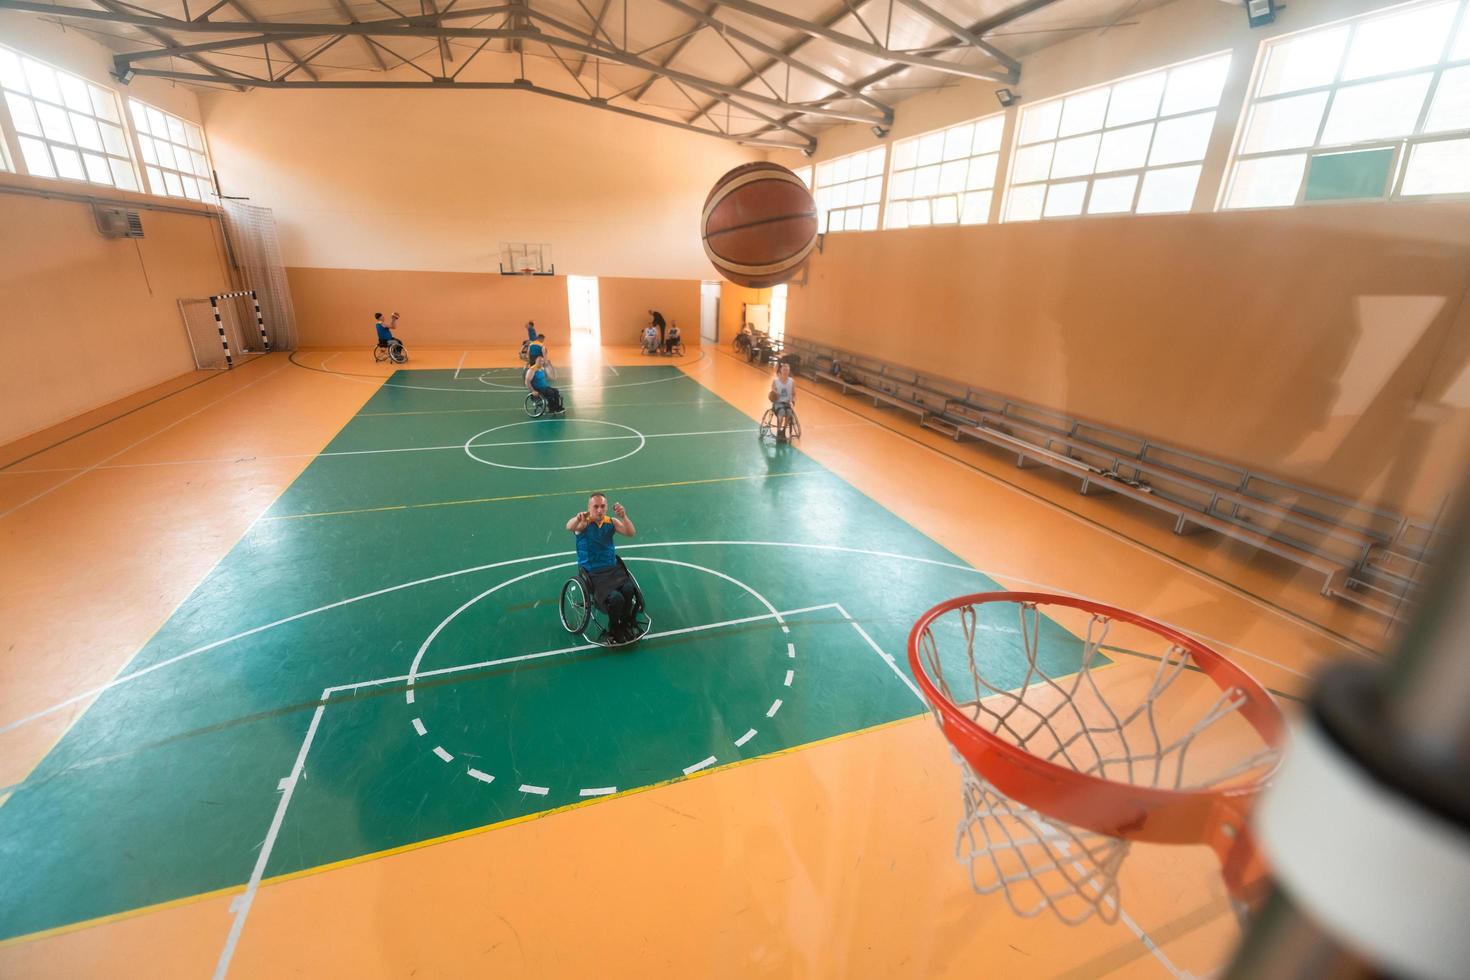 tow view photo of a war veteran playing basketball in a modern sports arena. The concept of sport for people with disabilities